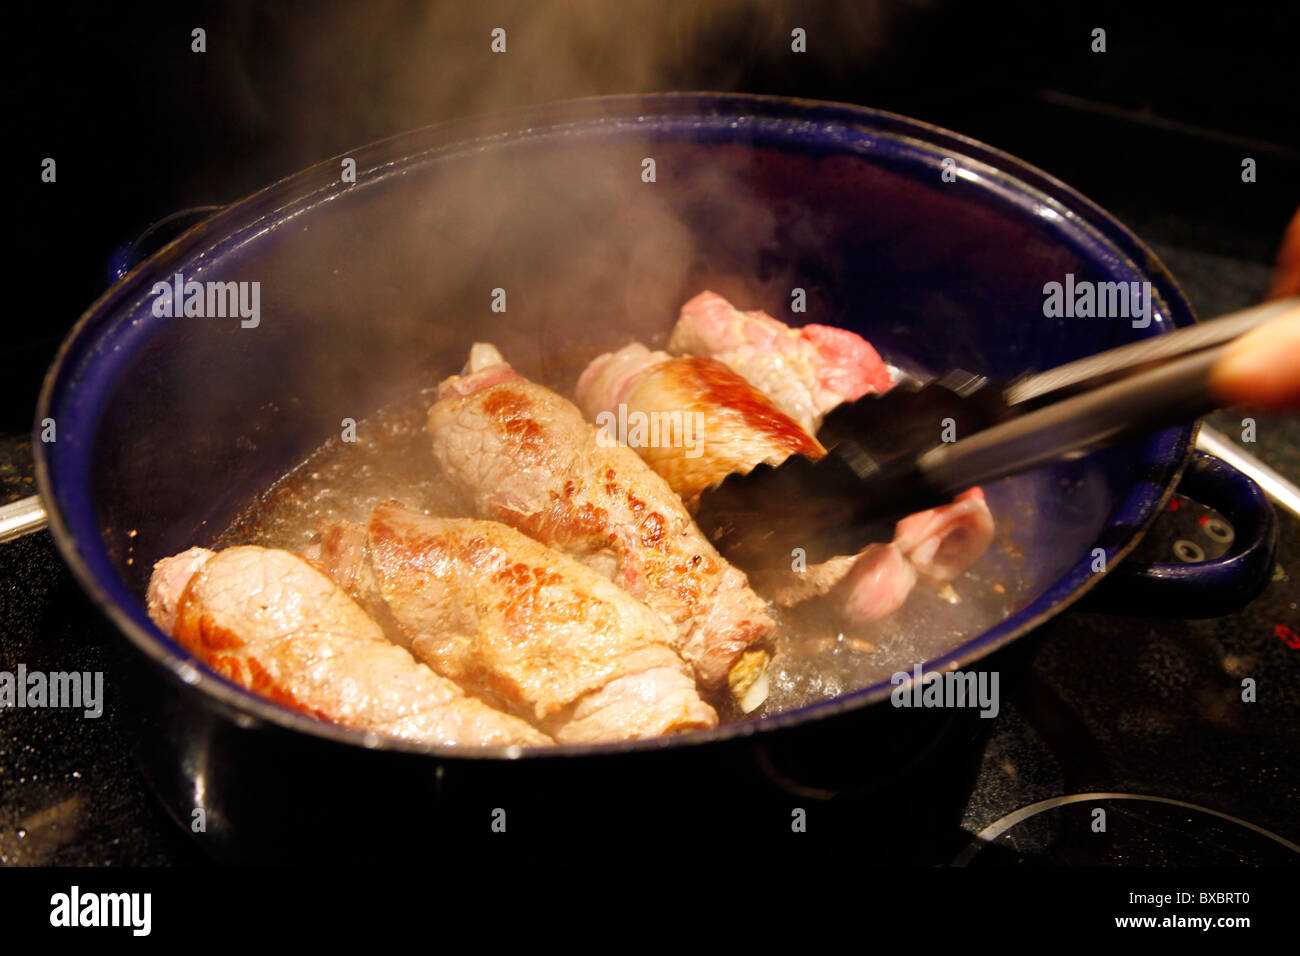 Beef roulades, fried in a roasting dish. Stock Photo